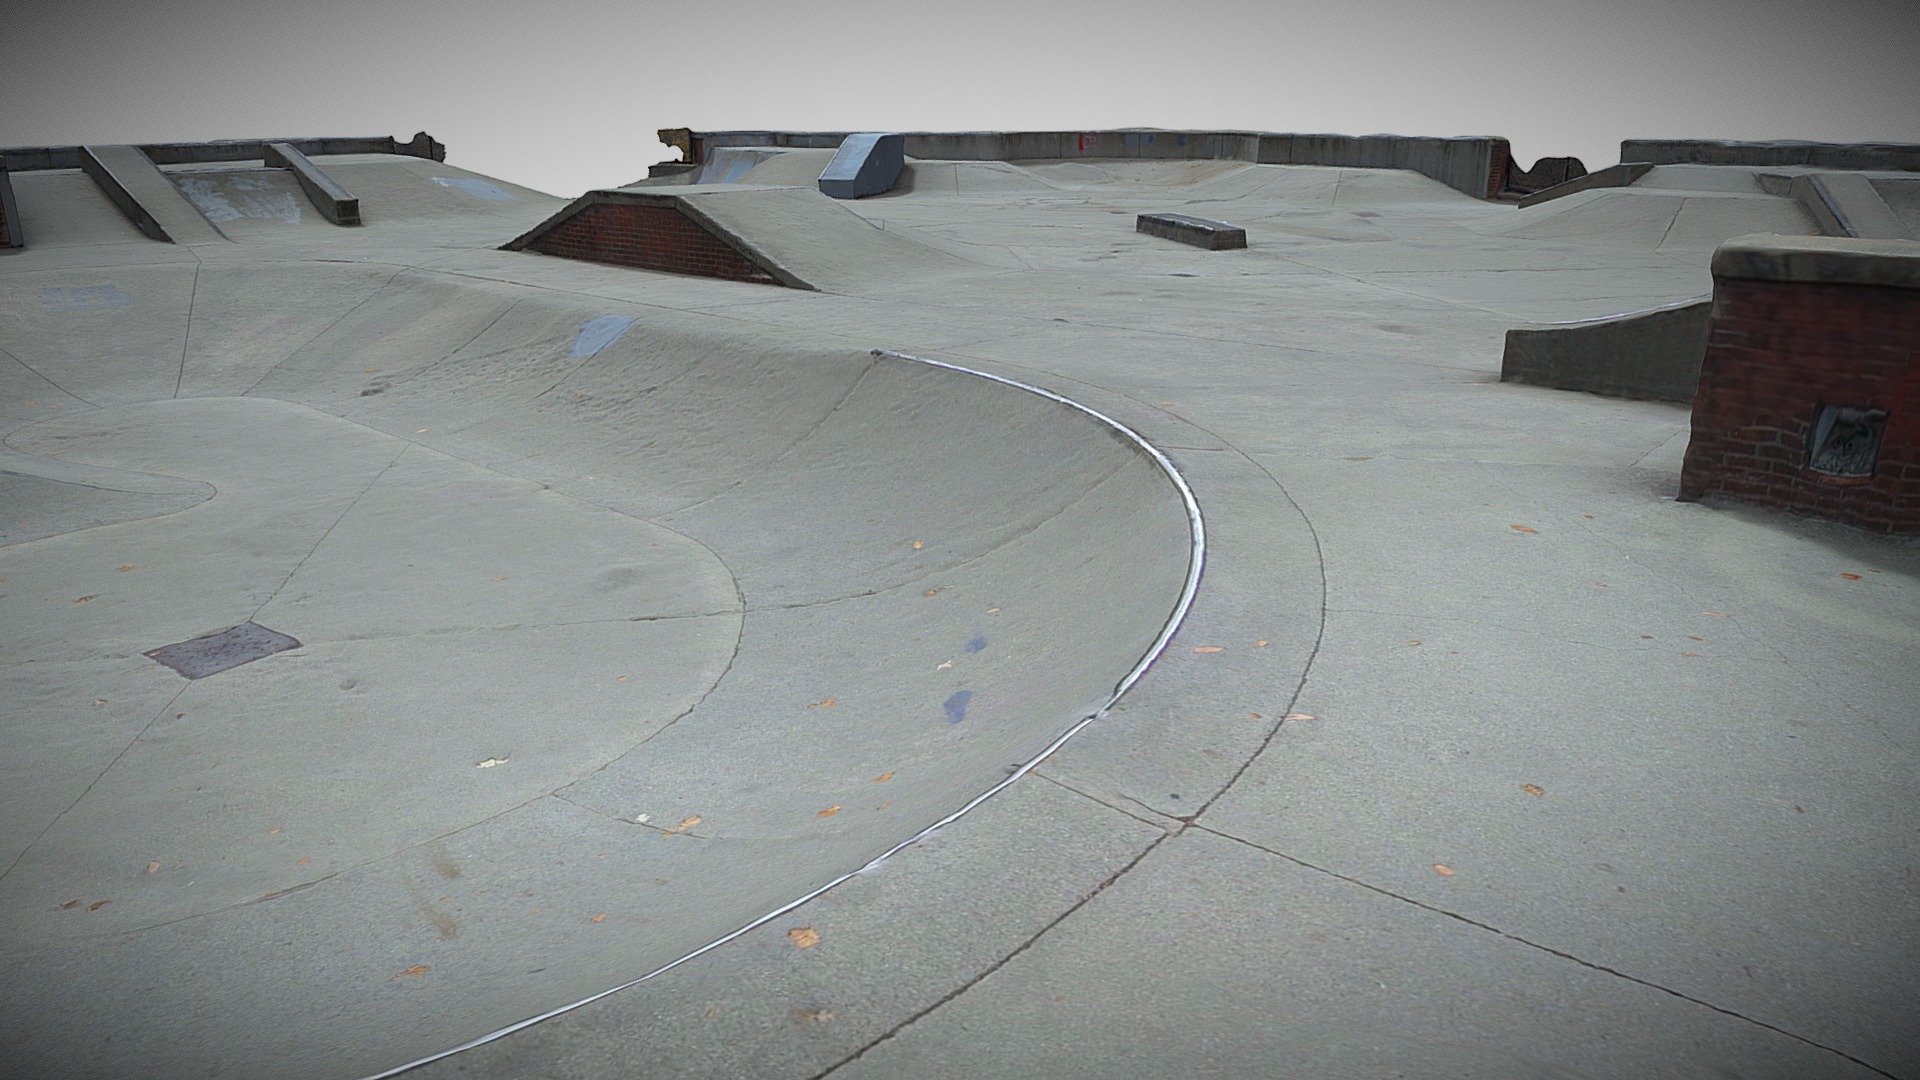 Skatepark in Lexington Ky  captured with a skydio 2+ prosseced in polly cam 250 pics - Full Skate park 3D Lexington, KY - Buy Royalty Free 3D model by OVERSIGHT (@cantstopmenow) 3d model